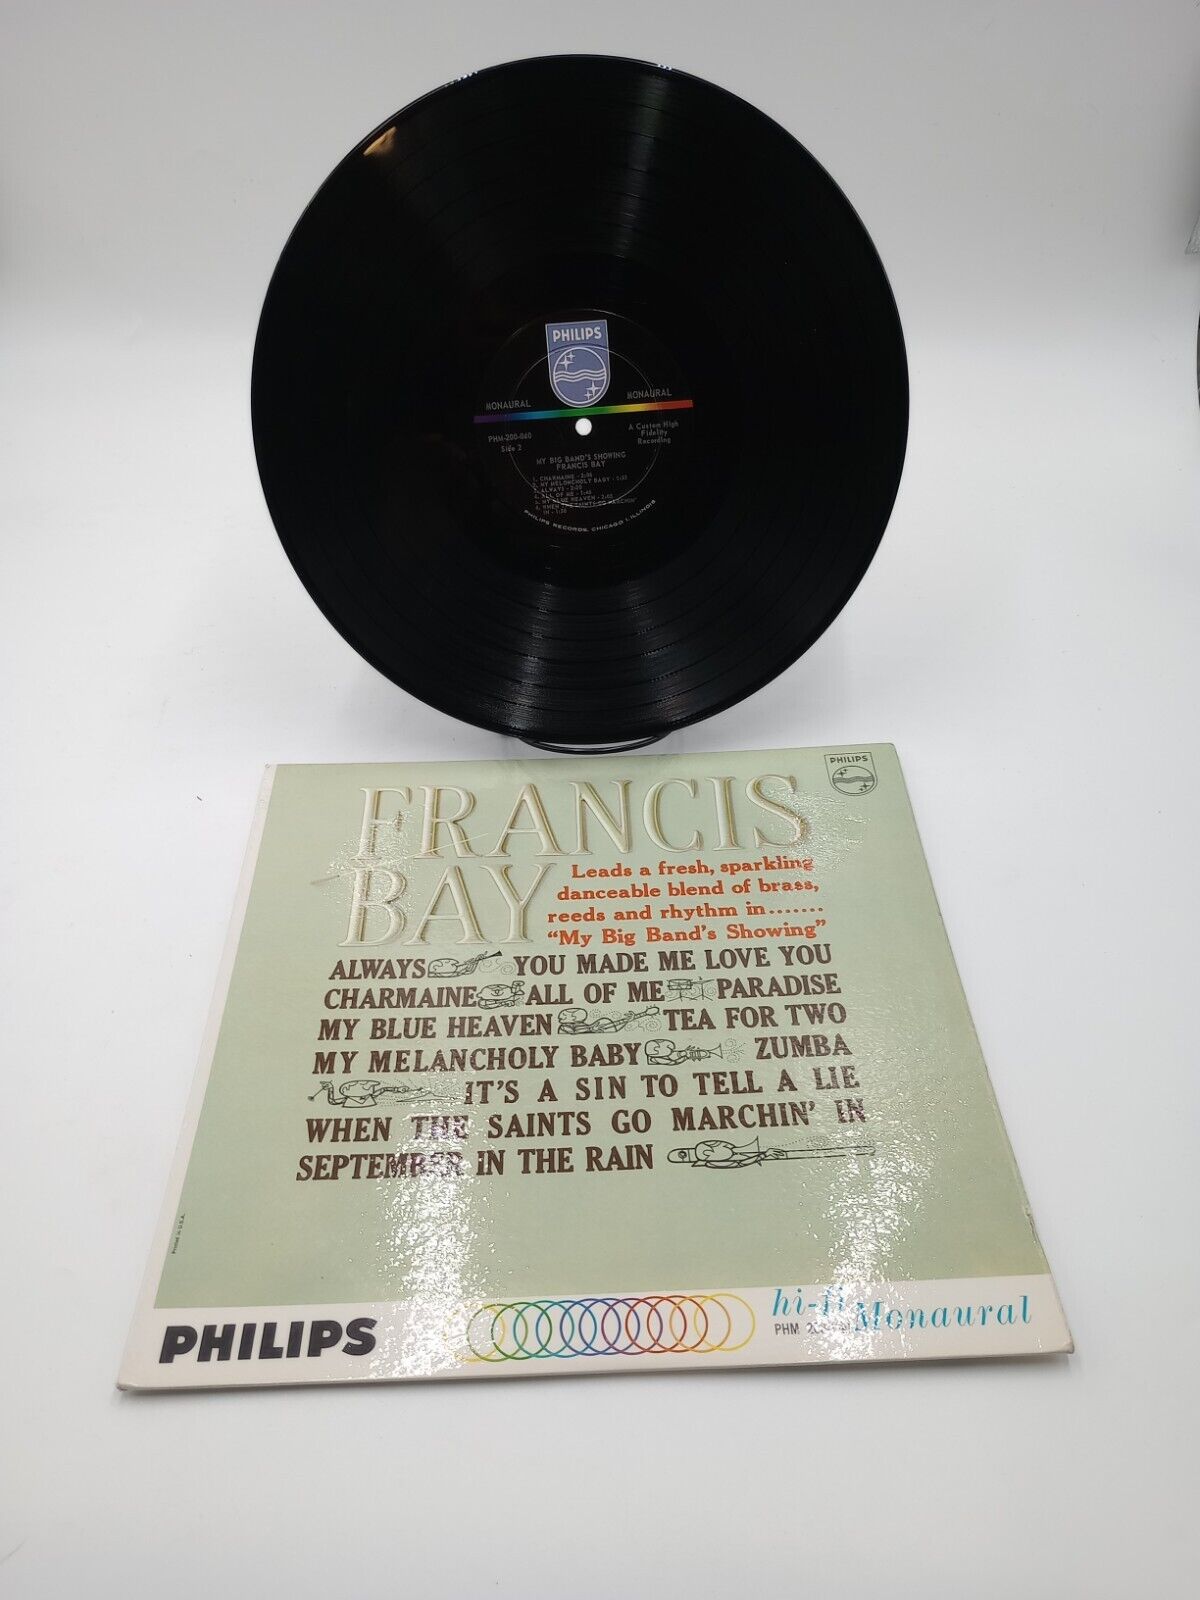 BOXDG38 Francis Bay - My Big Band's Showing LP, Mono Philips PHM 200-040 US